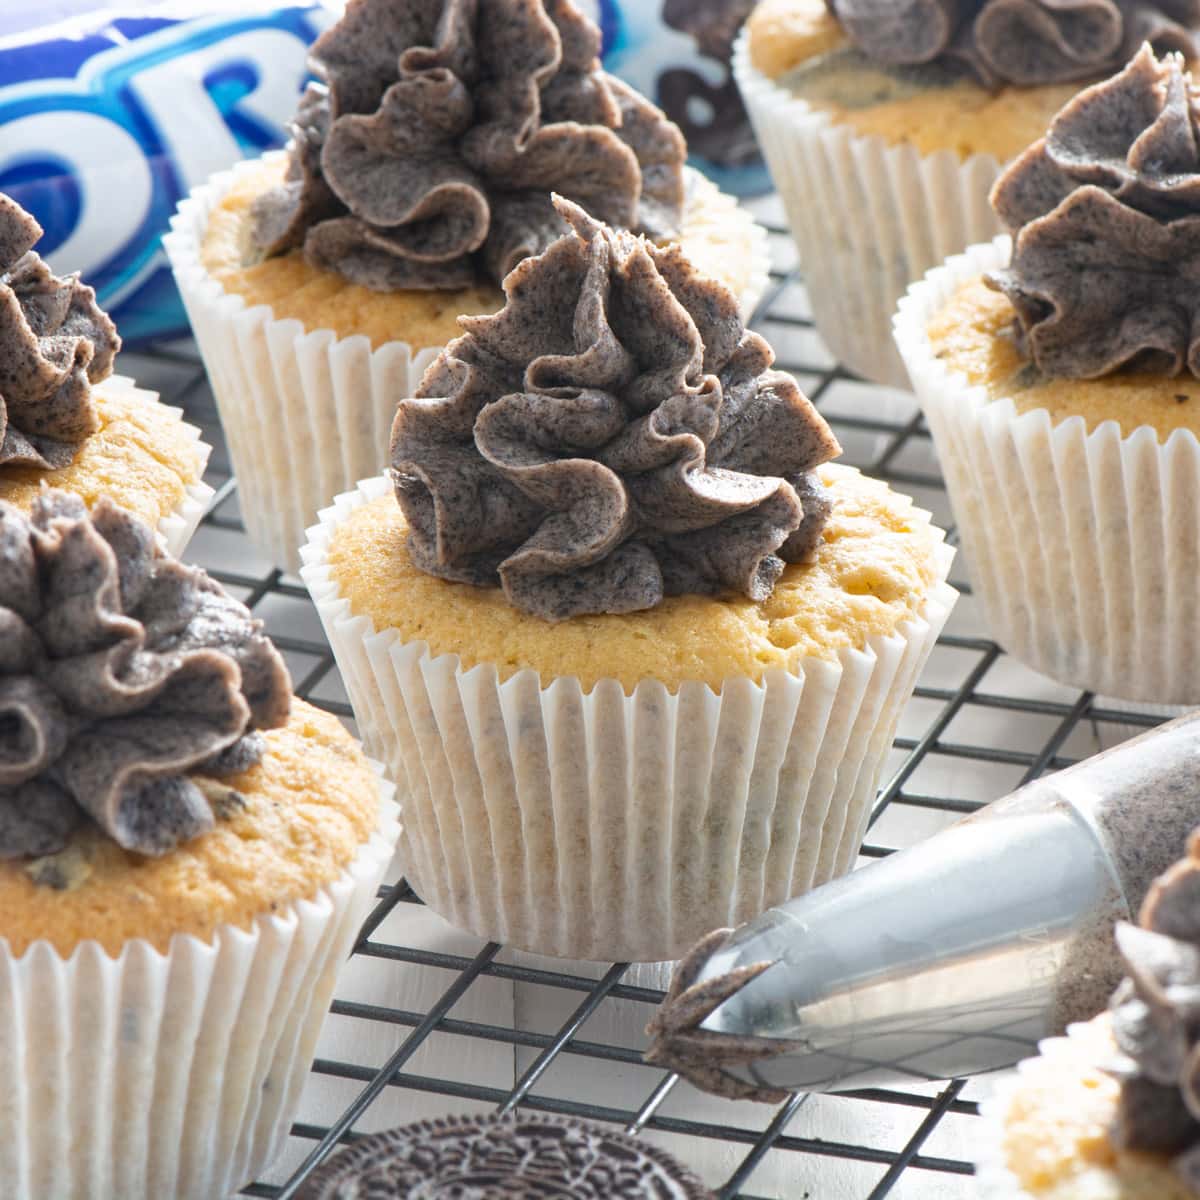 Oreo cupcakes topped with Oreo buttercream and Oreo buttercream in a piping bag.